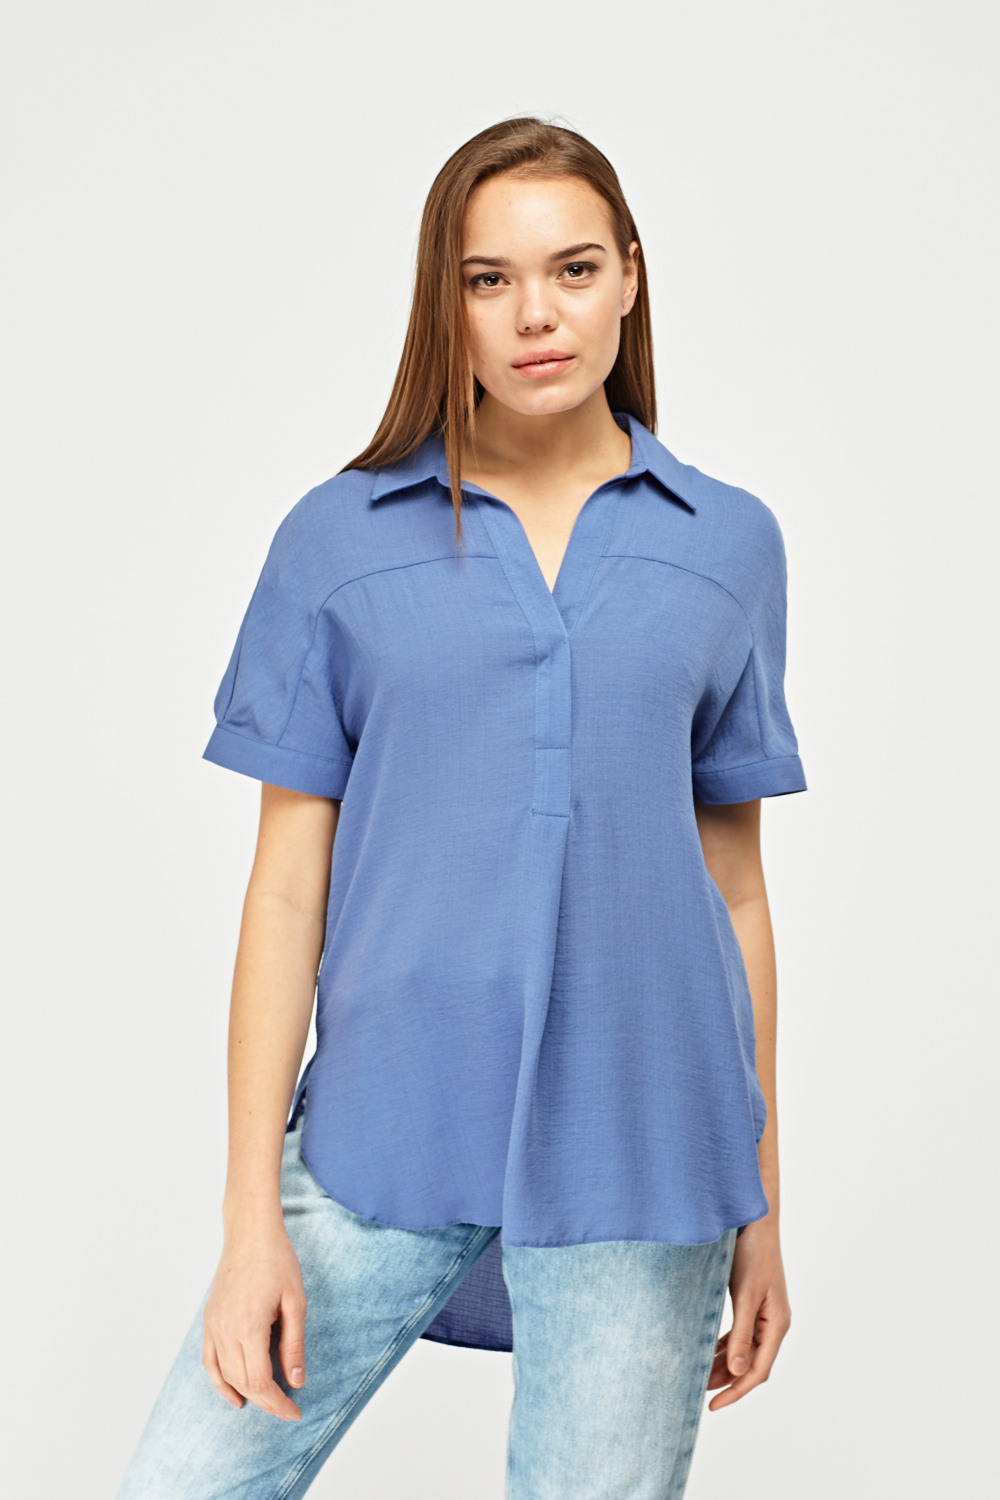 Loose Flow Chiffon Blouse - Just $3